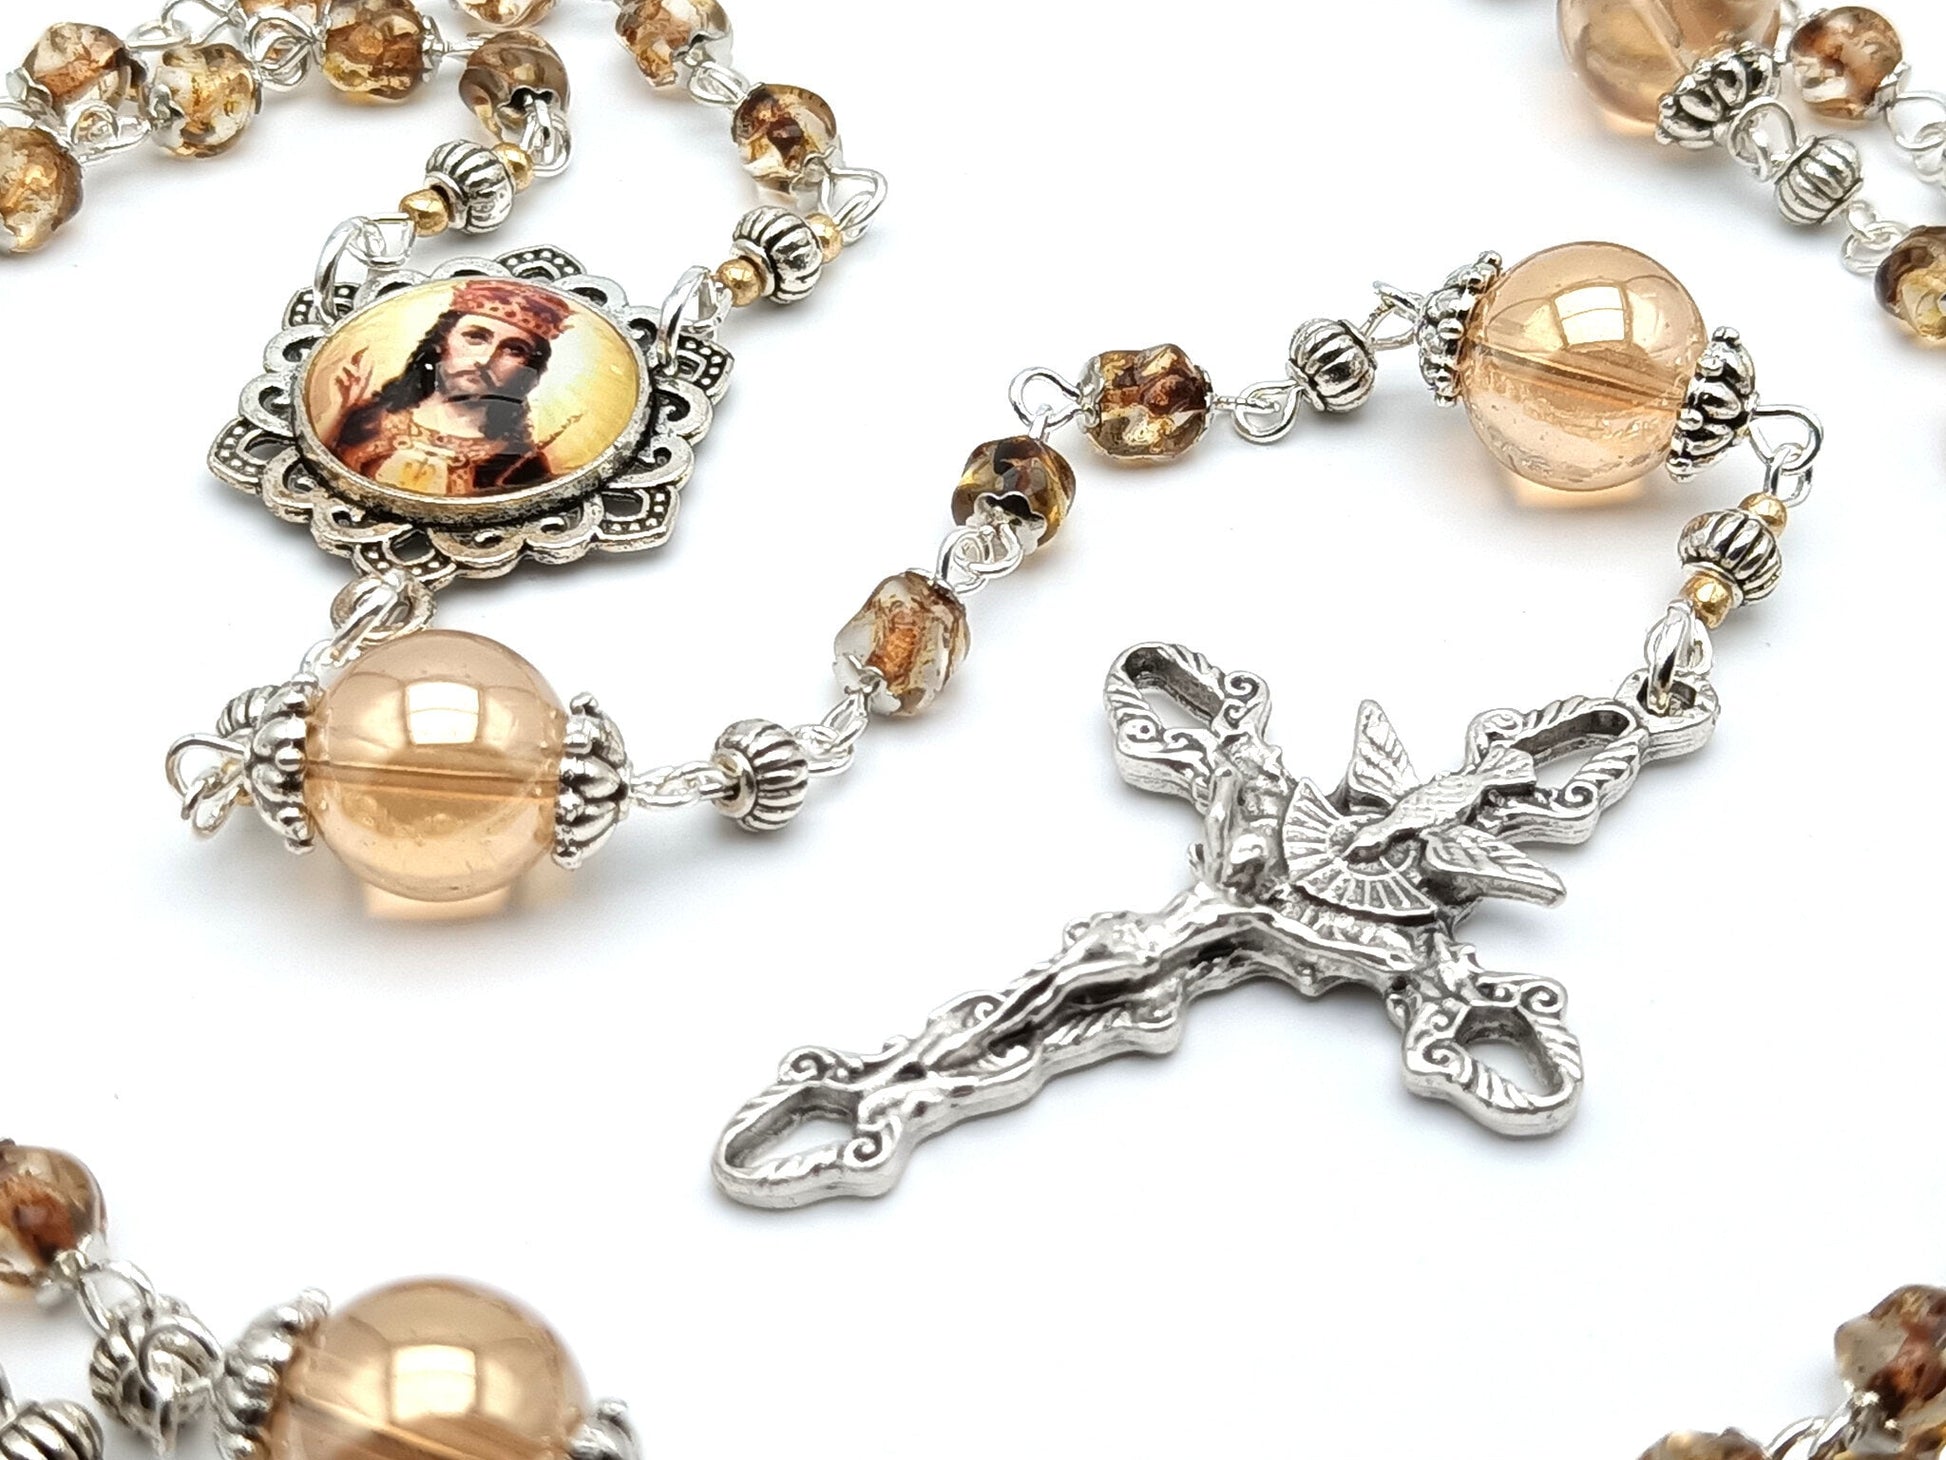 Christ the King unique rosary beads with nugget amber glass beads, silver Holy Spirit crucifix and picture centre medal.